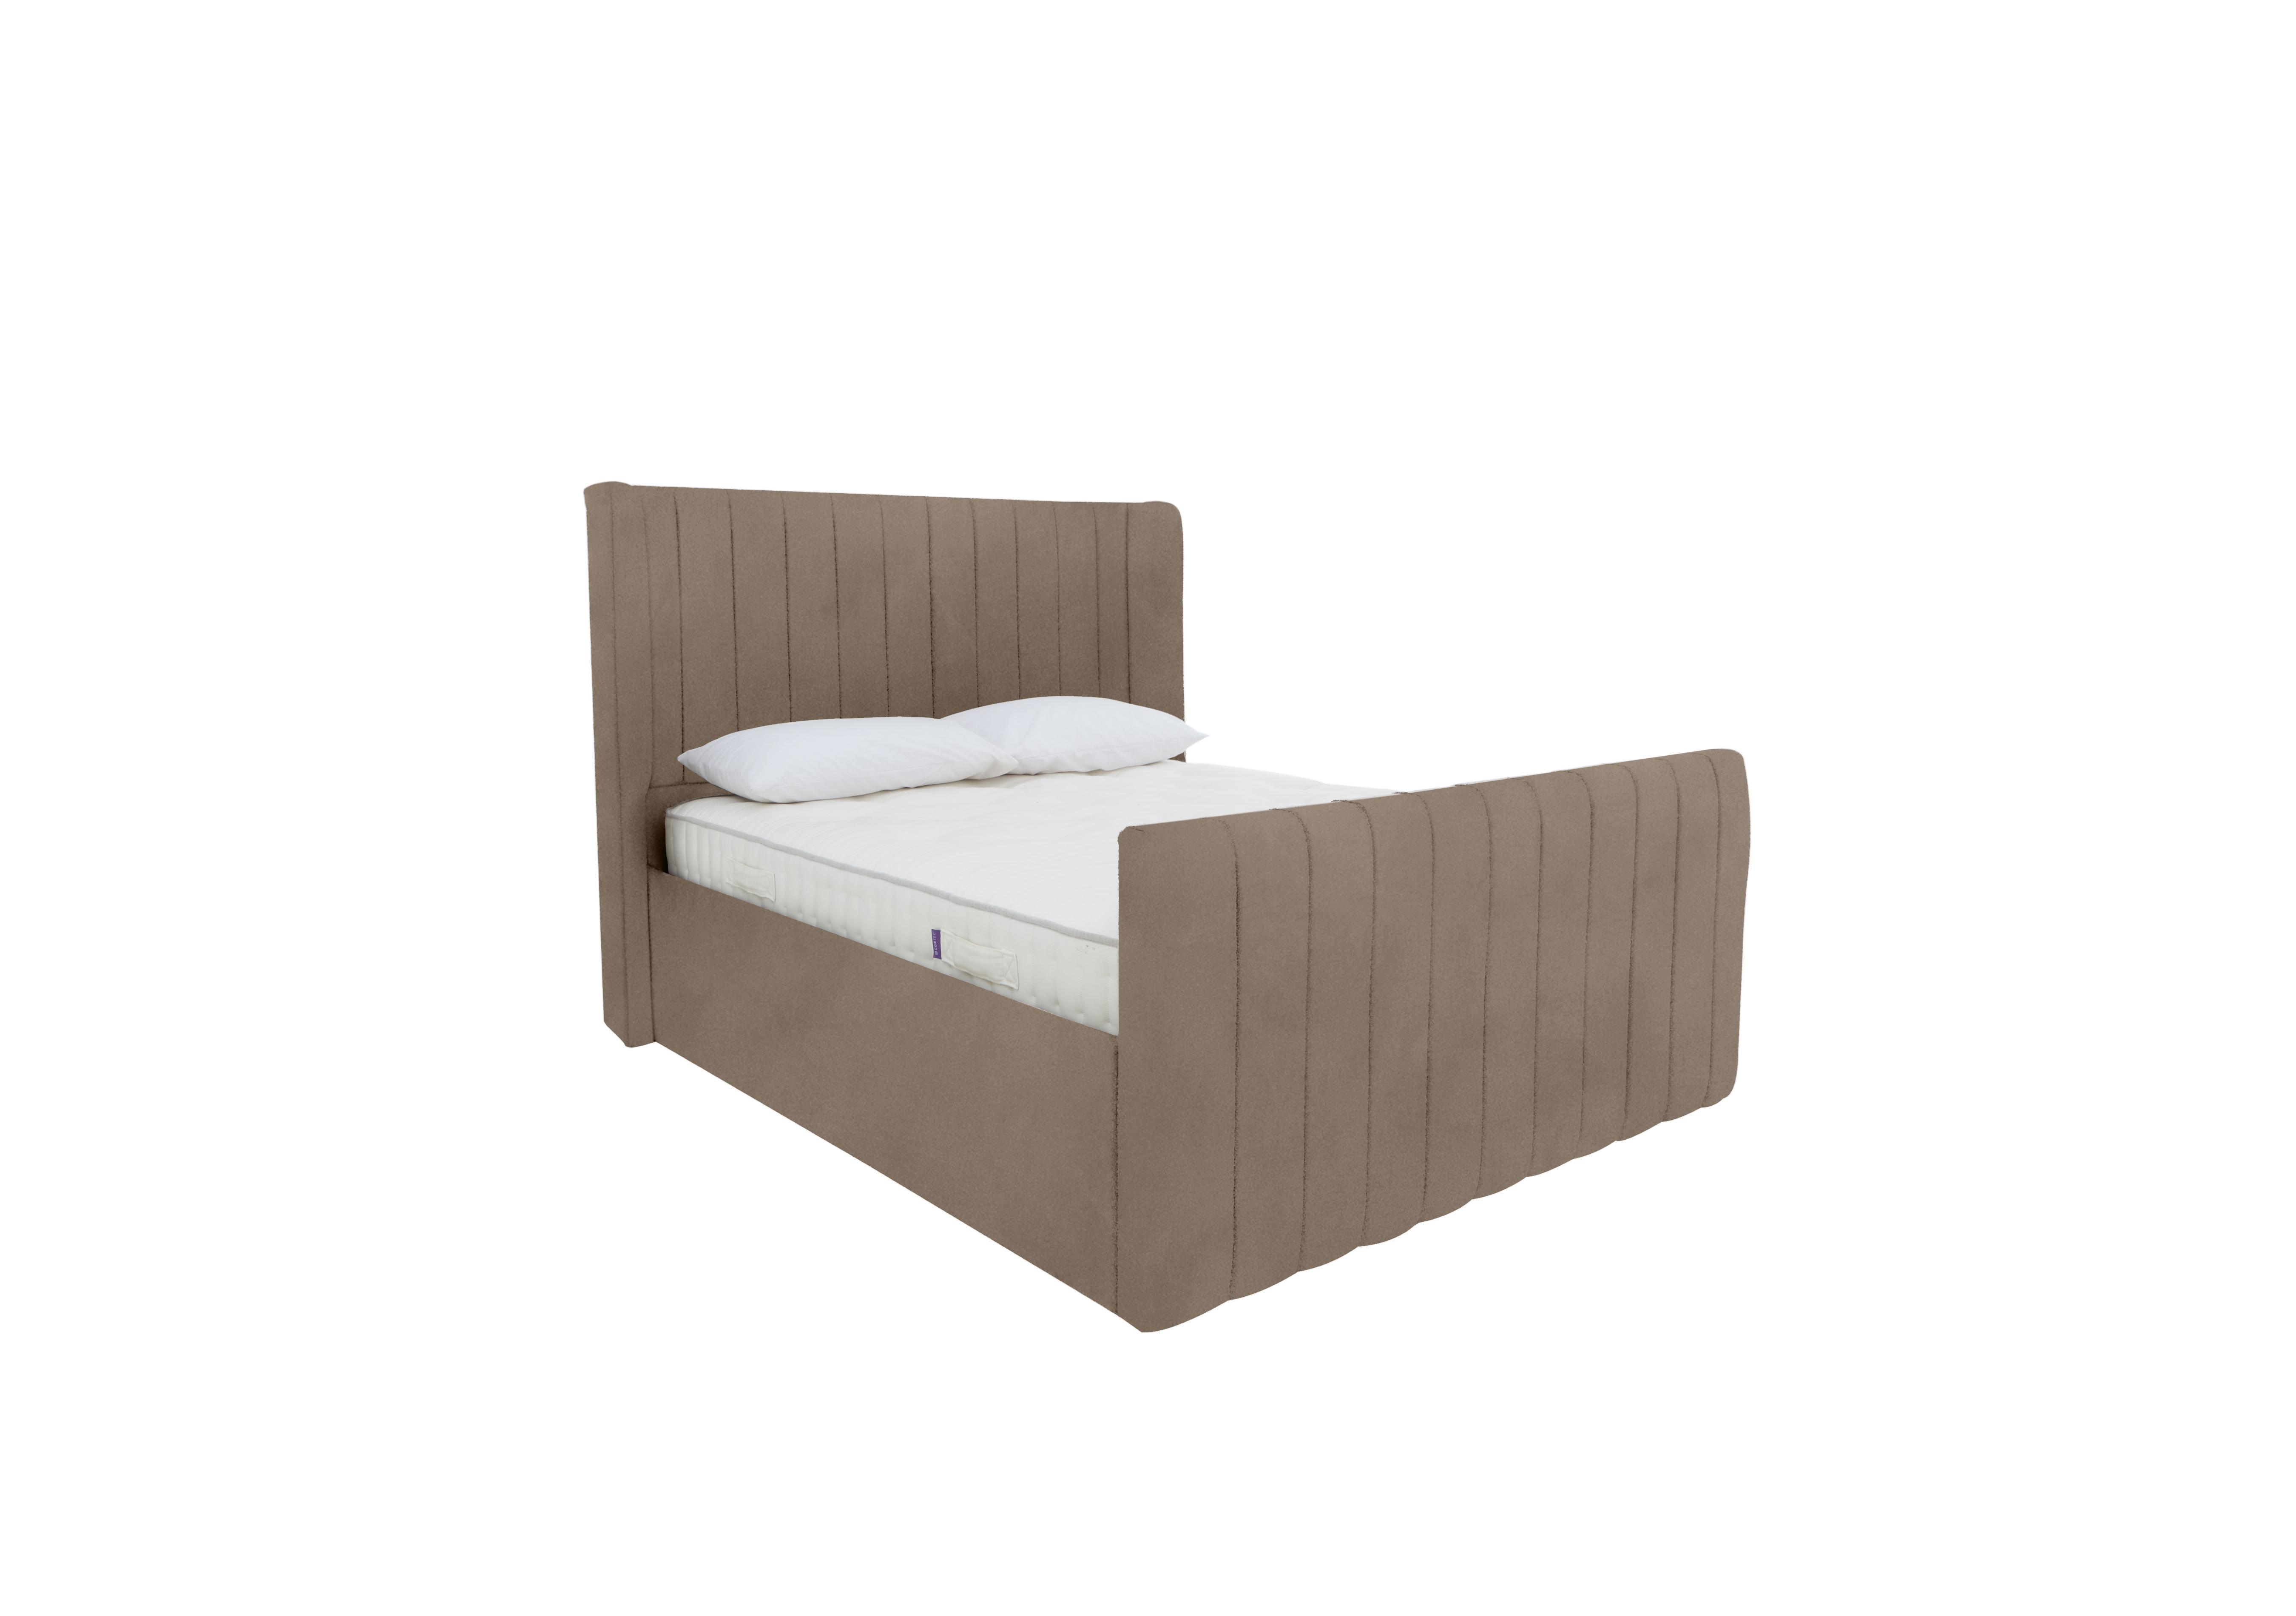 Eira High Foot End Ottoman Bed Frame in Sanderson Potters Clay on Furniture Village